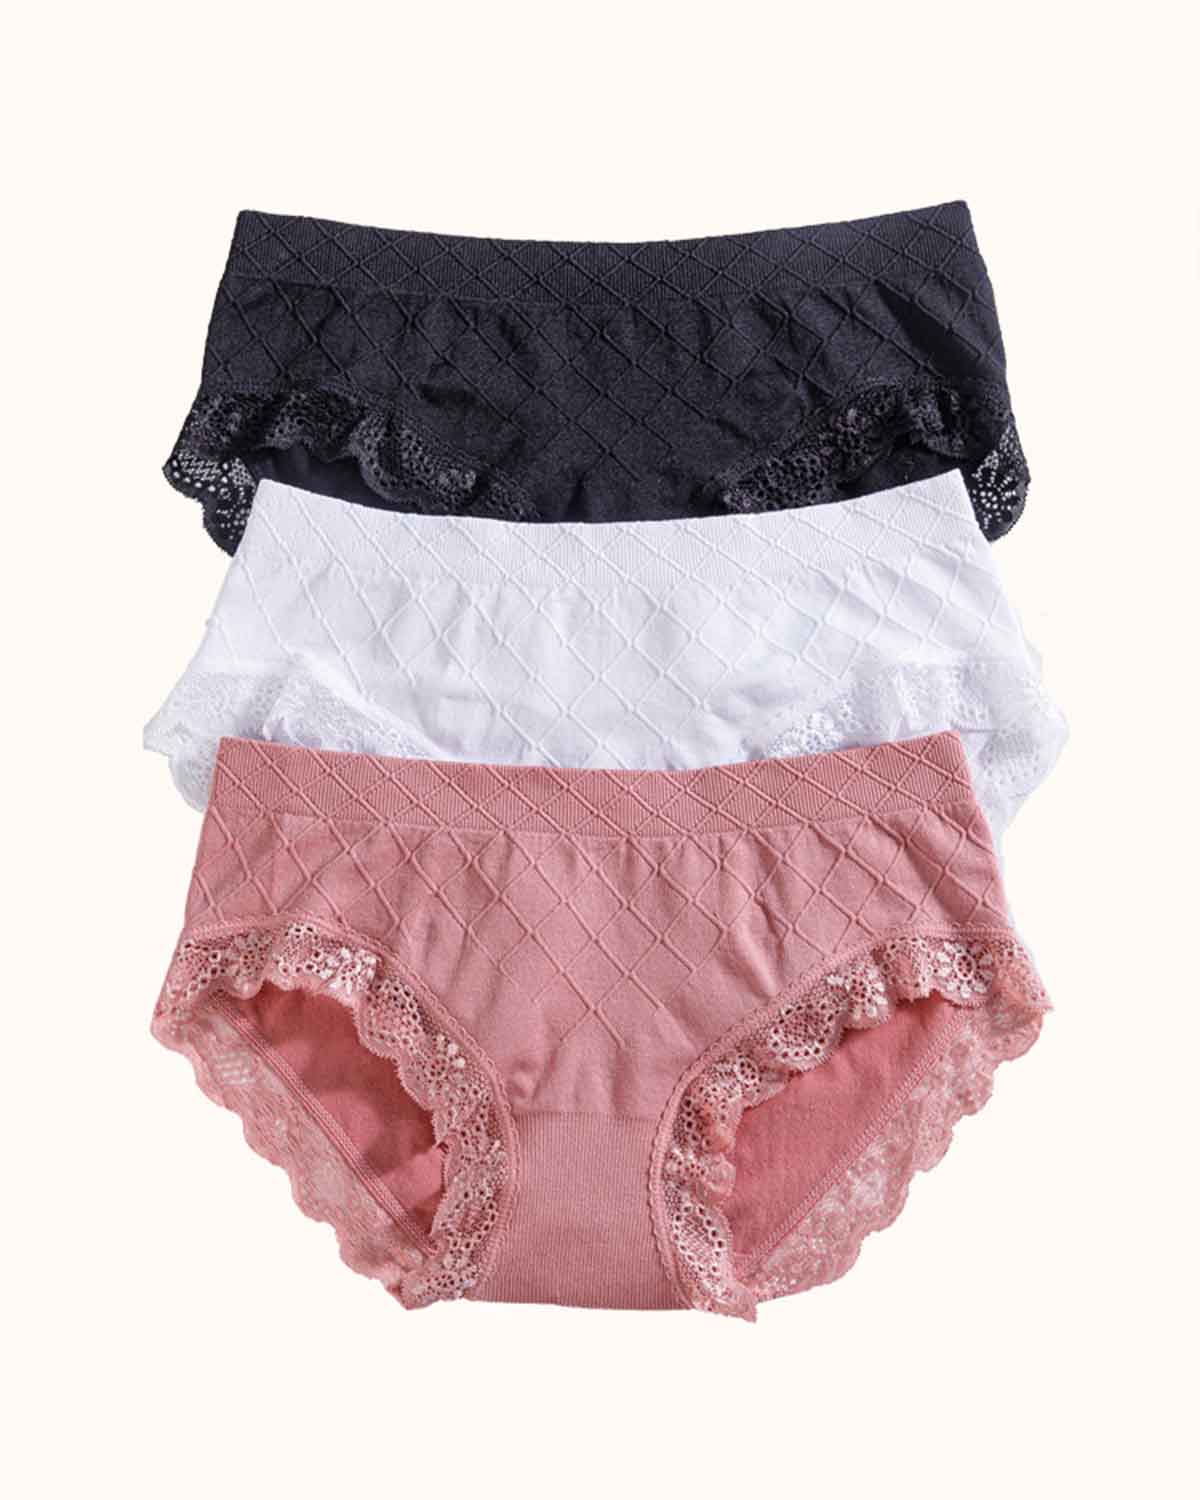 Style 9047 Lace Panties Whole Carton (One Size, 105 Pcs of Each Color Black/White/Pink, 315 Pcs in Total)